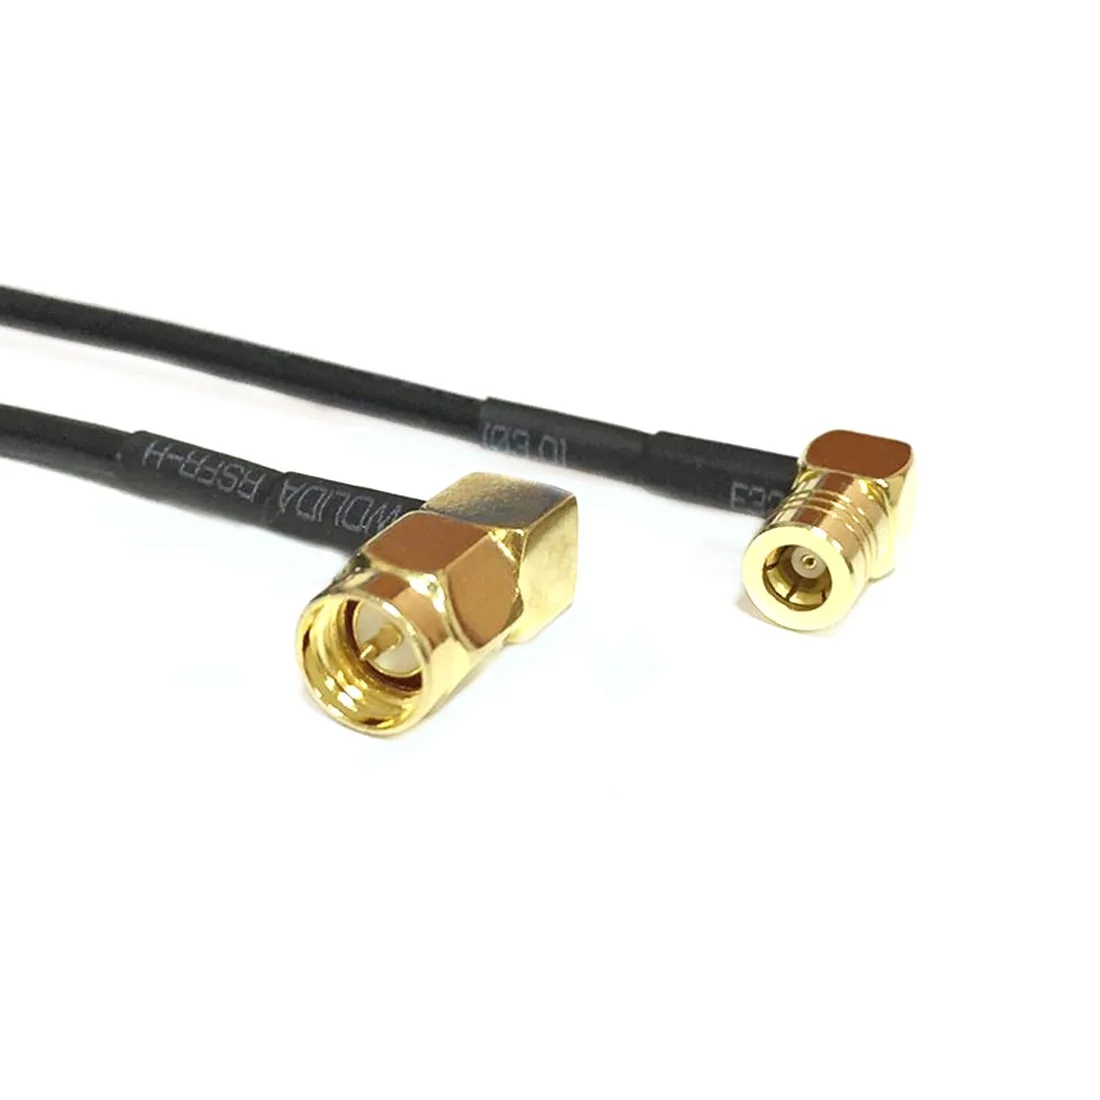 

Modem Coaxial Cable SMA Male Plug Right Angle Connector Switch SMB Female Jack Right Angle RG174 Cable pigtail 20cm 8" Adapter